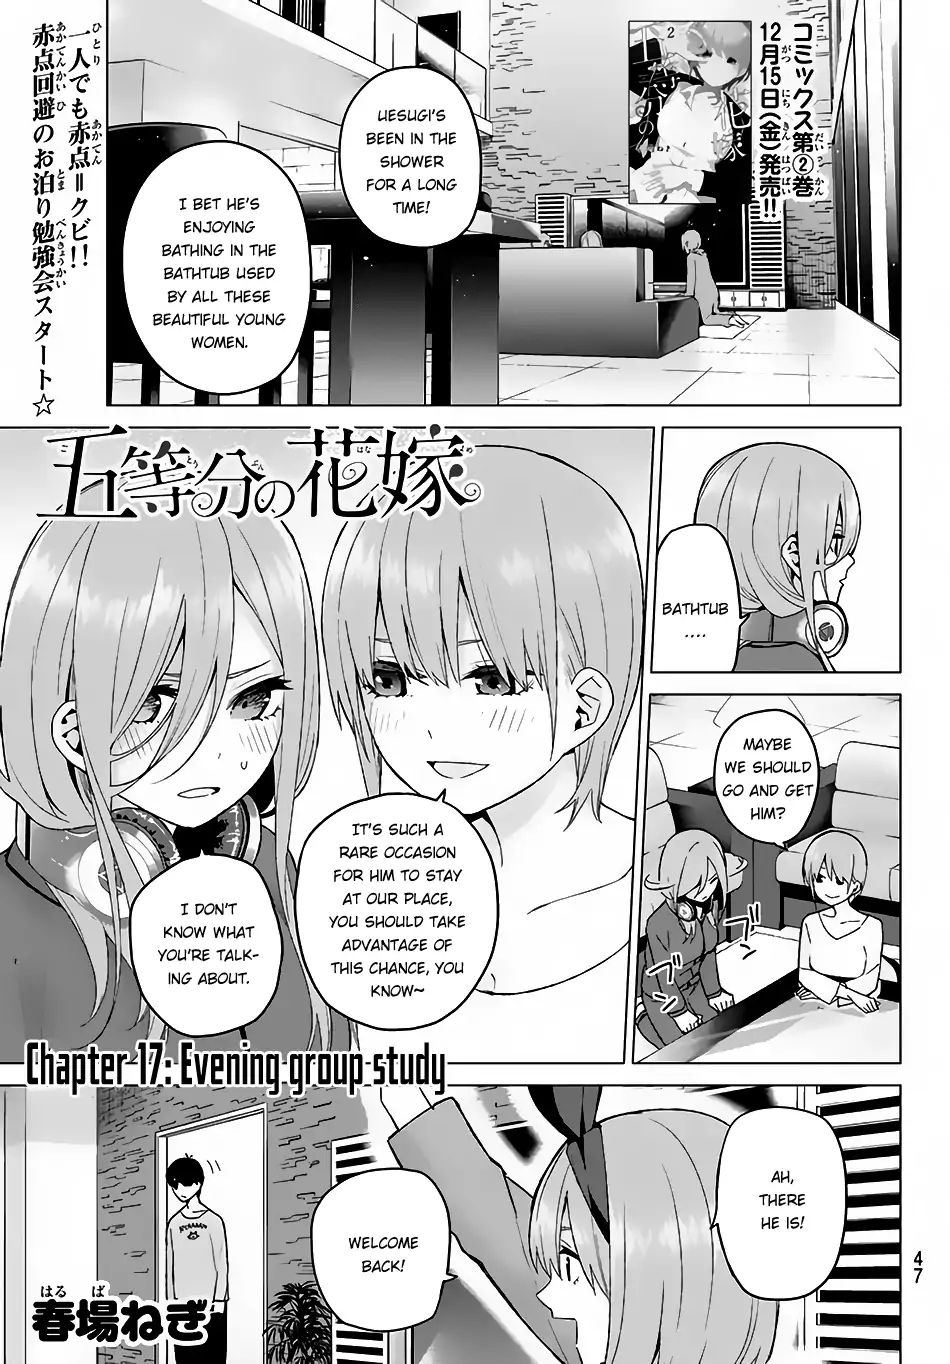 Go-Toubun No Hanayome Vol.3 Chapter 17: Evening Group Study - Picture 2